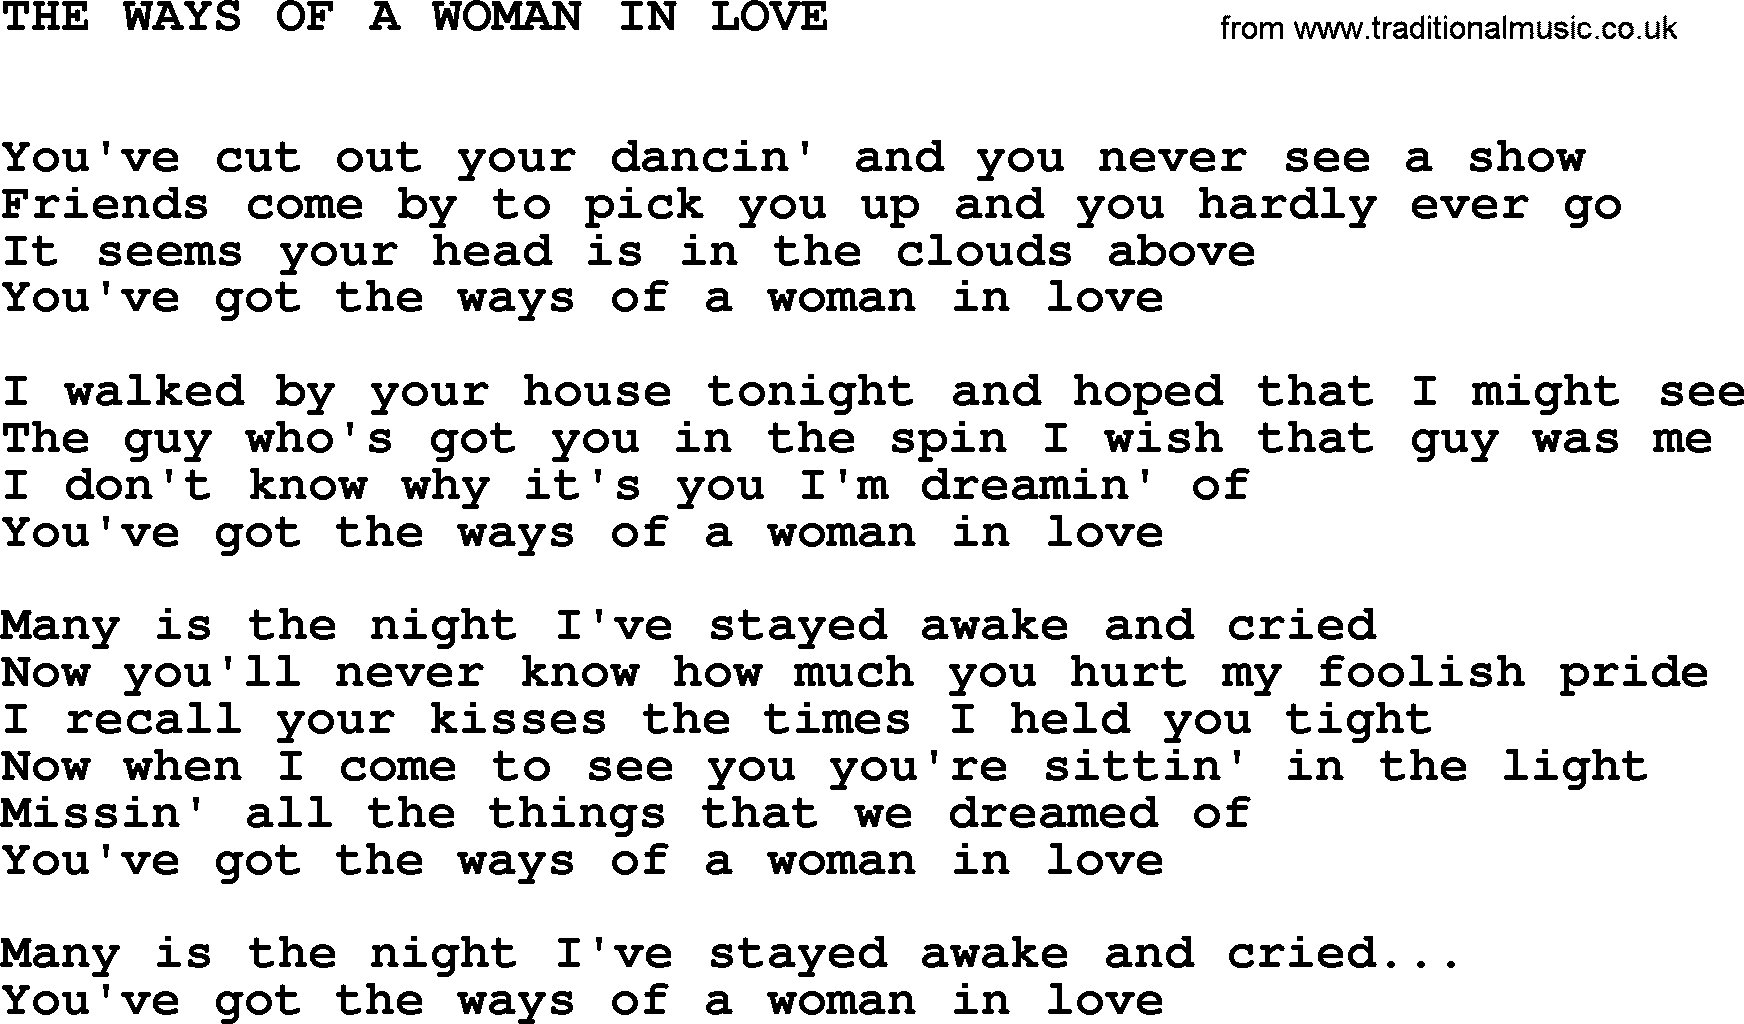 Johnny Cash song The Ways Of A Woman In Love.txt lyrics